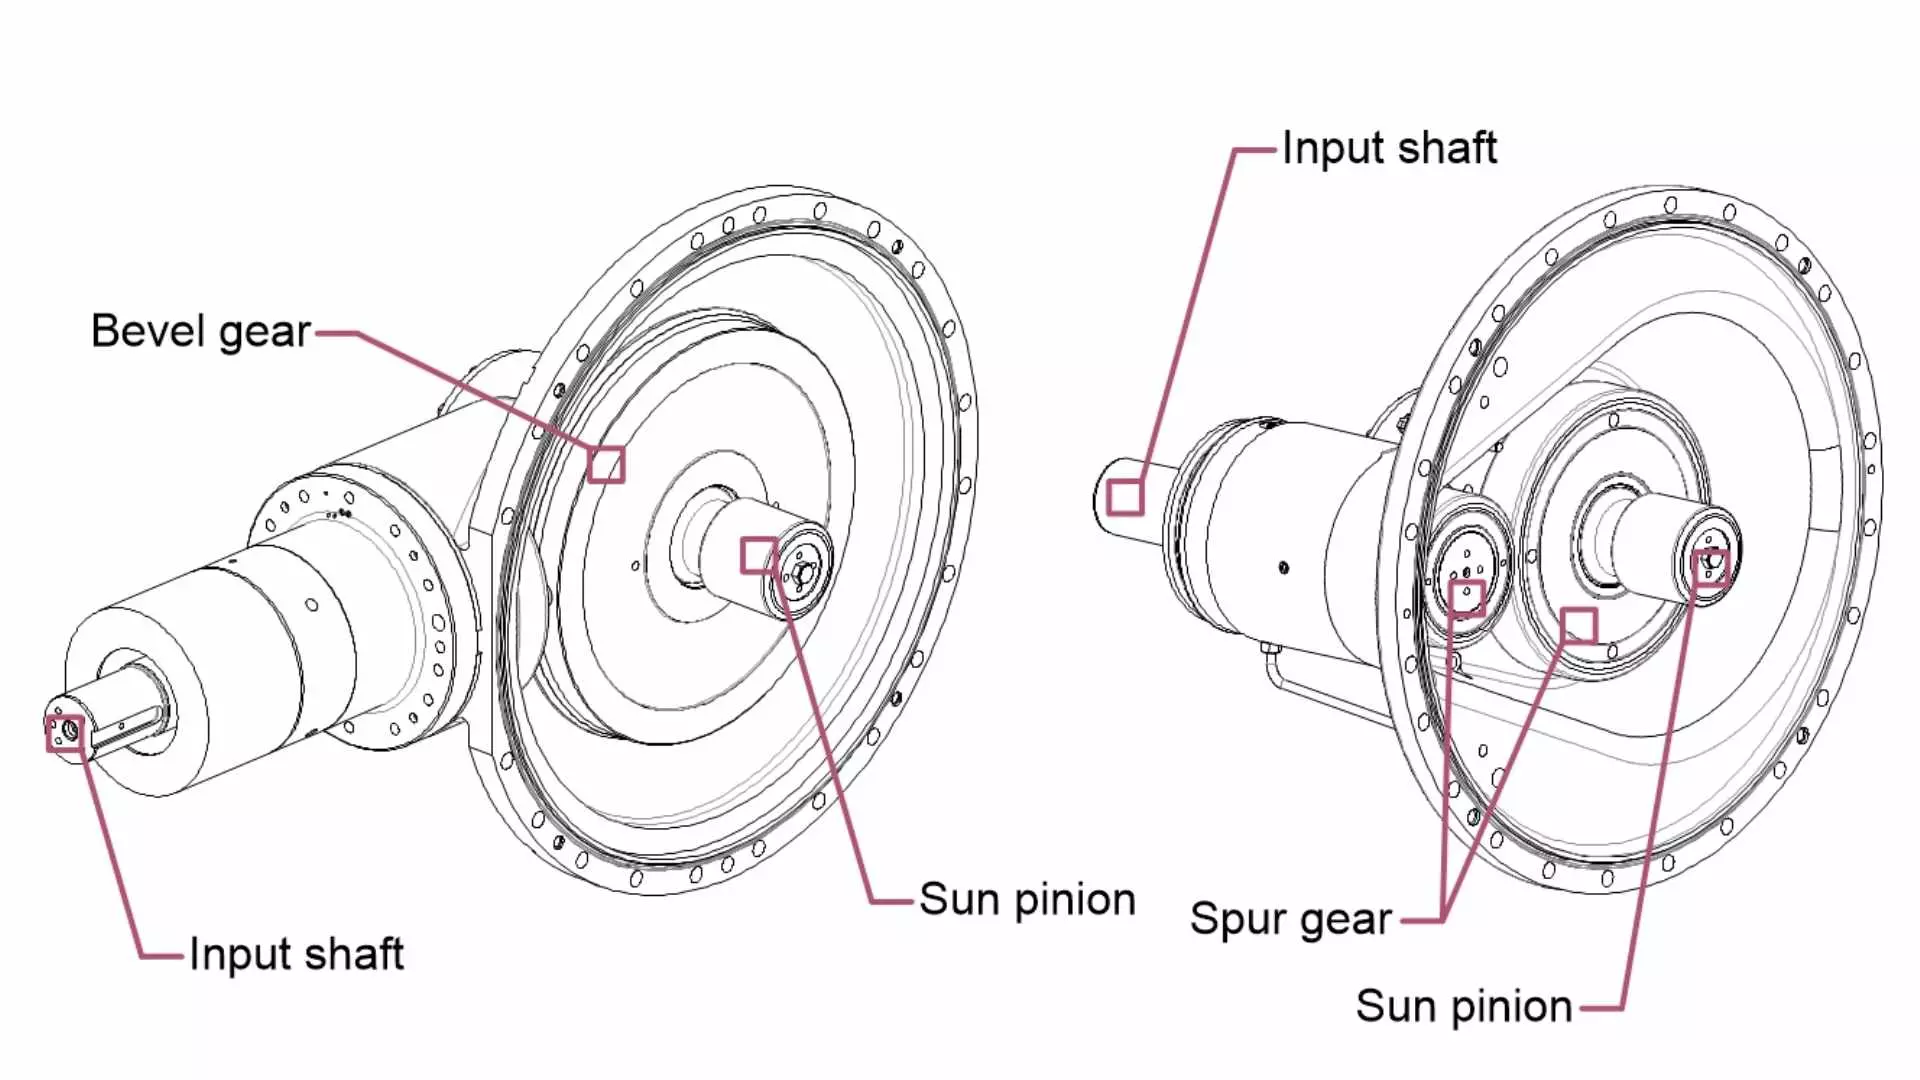 Bevel gear and spur gear entry stage for PPU-C gear unit